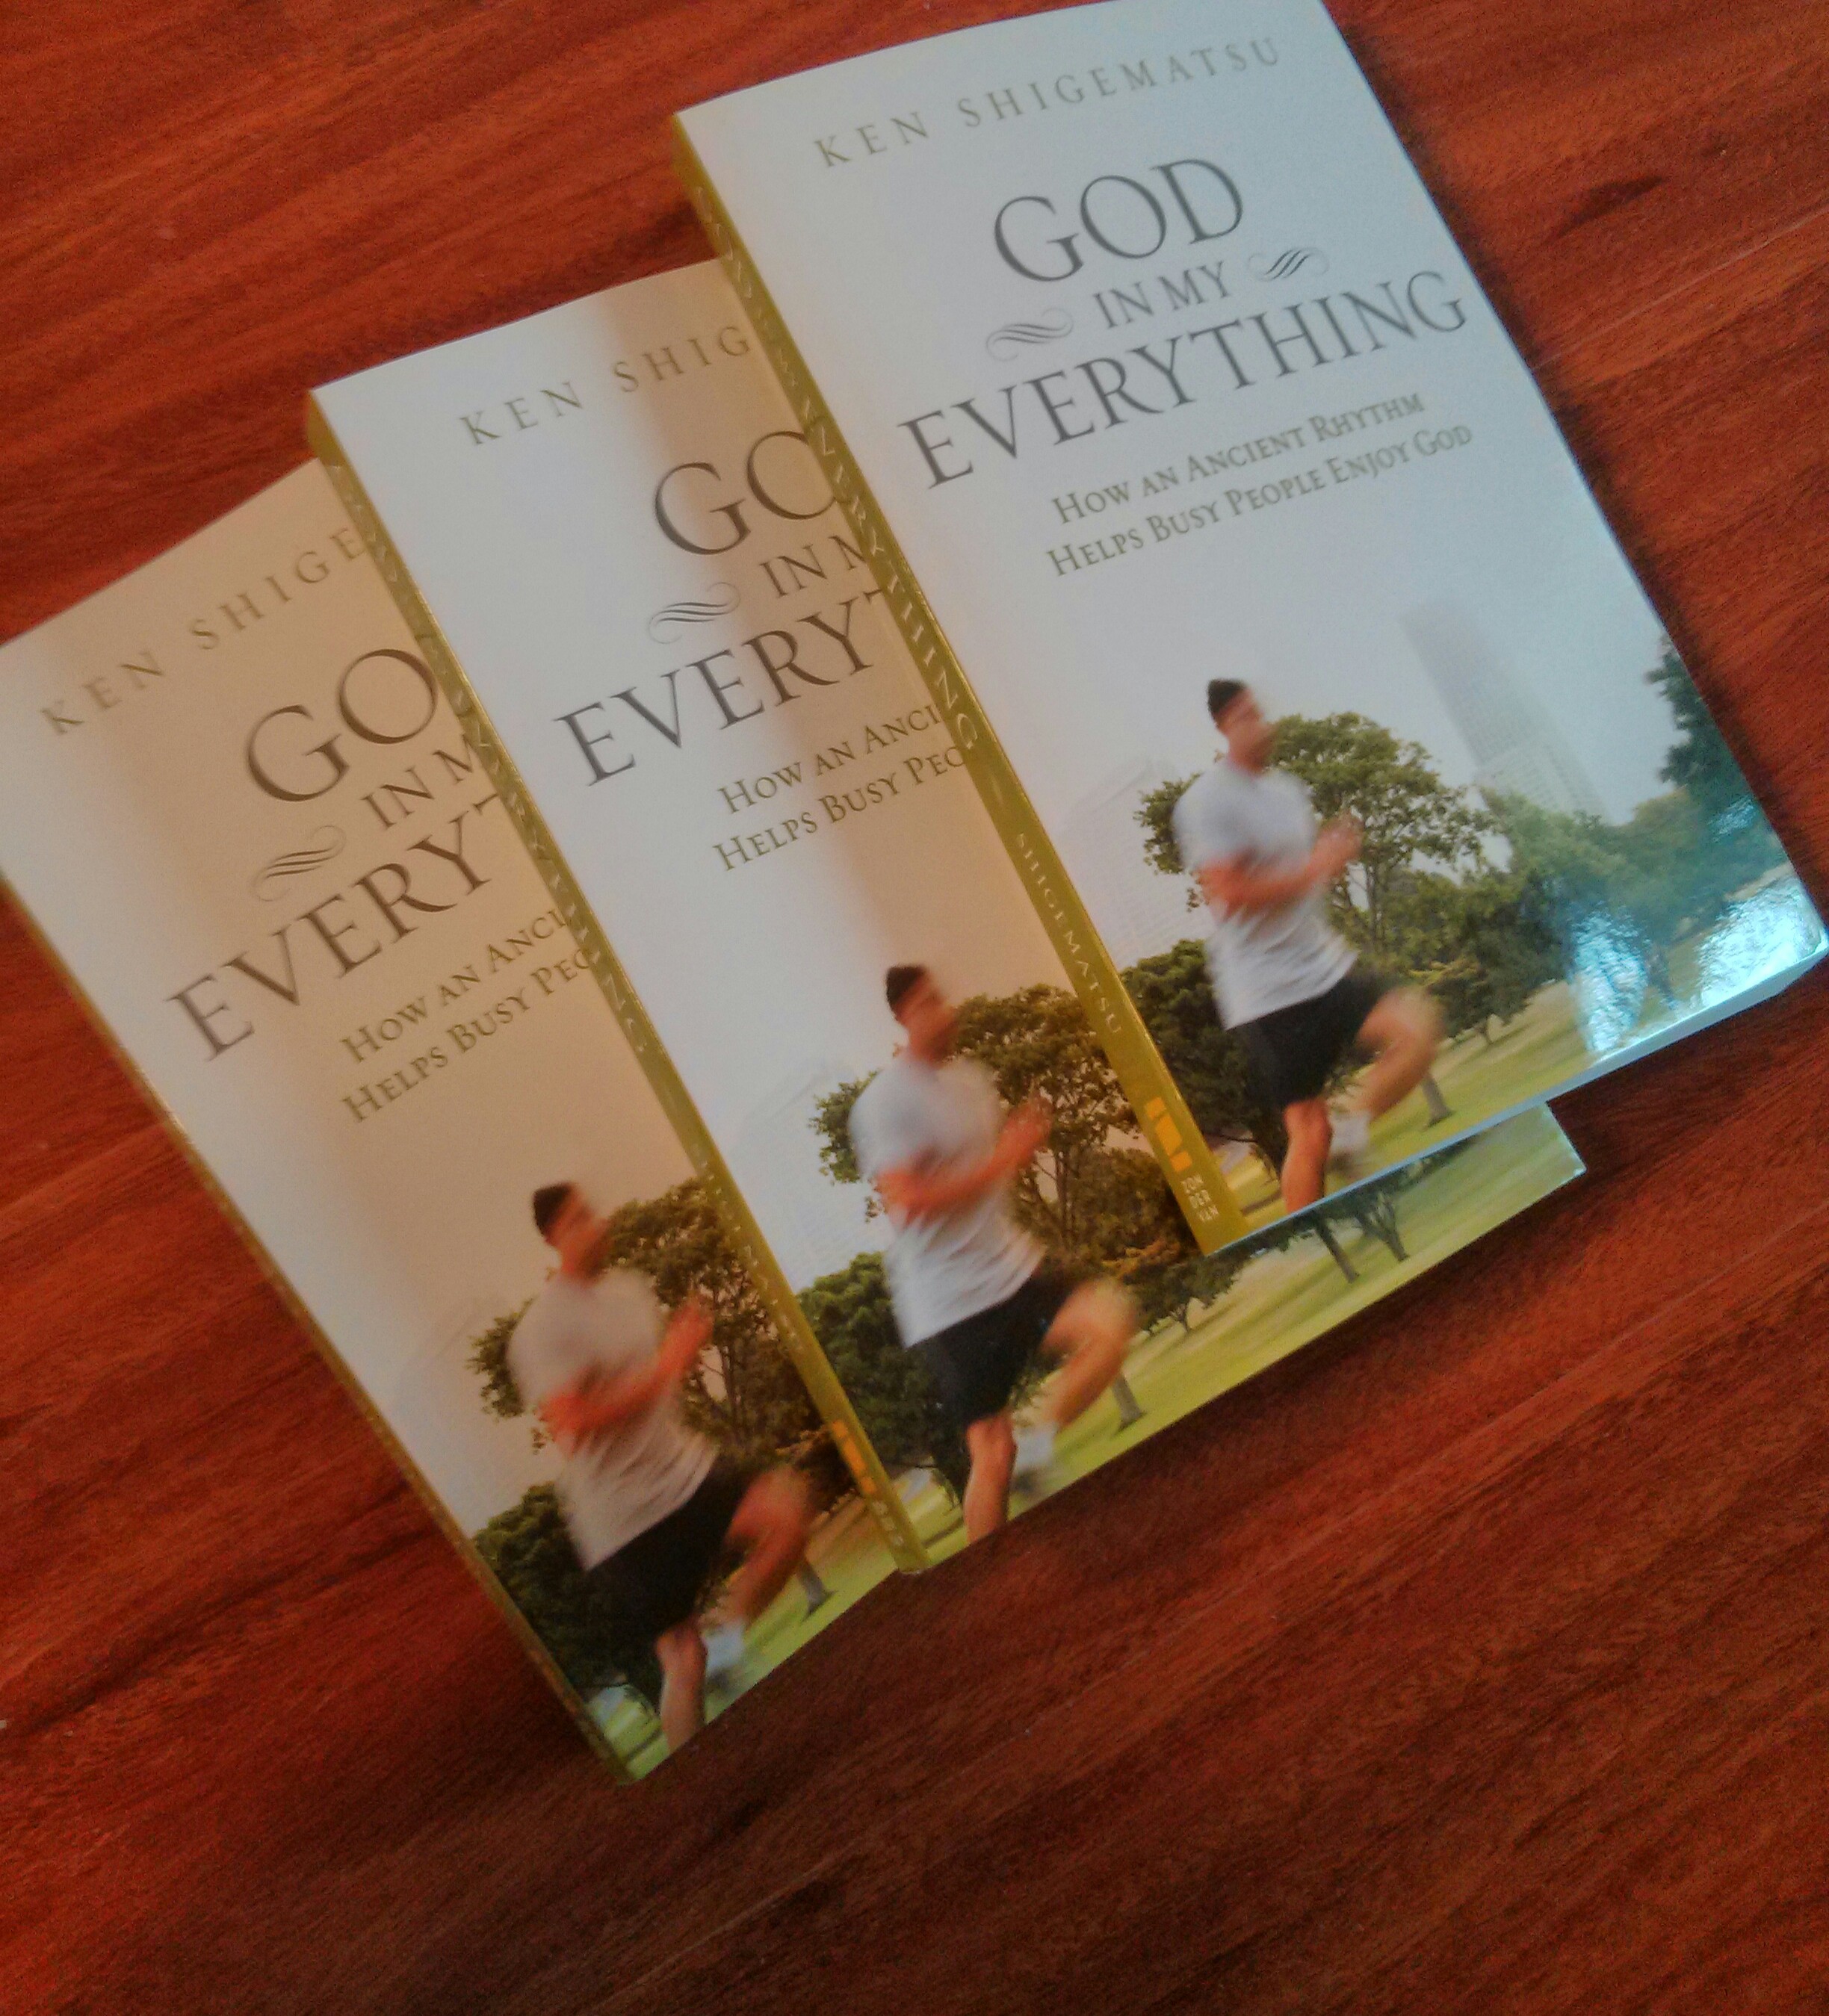 God In My Everything by Ken Shigematsu - Book Review